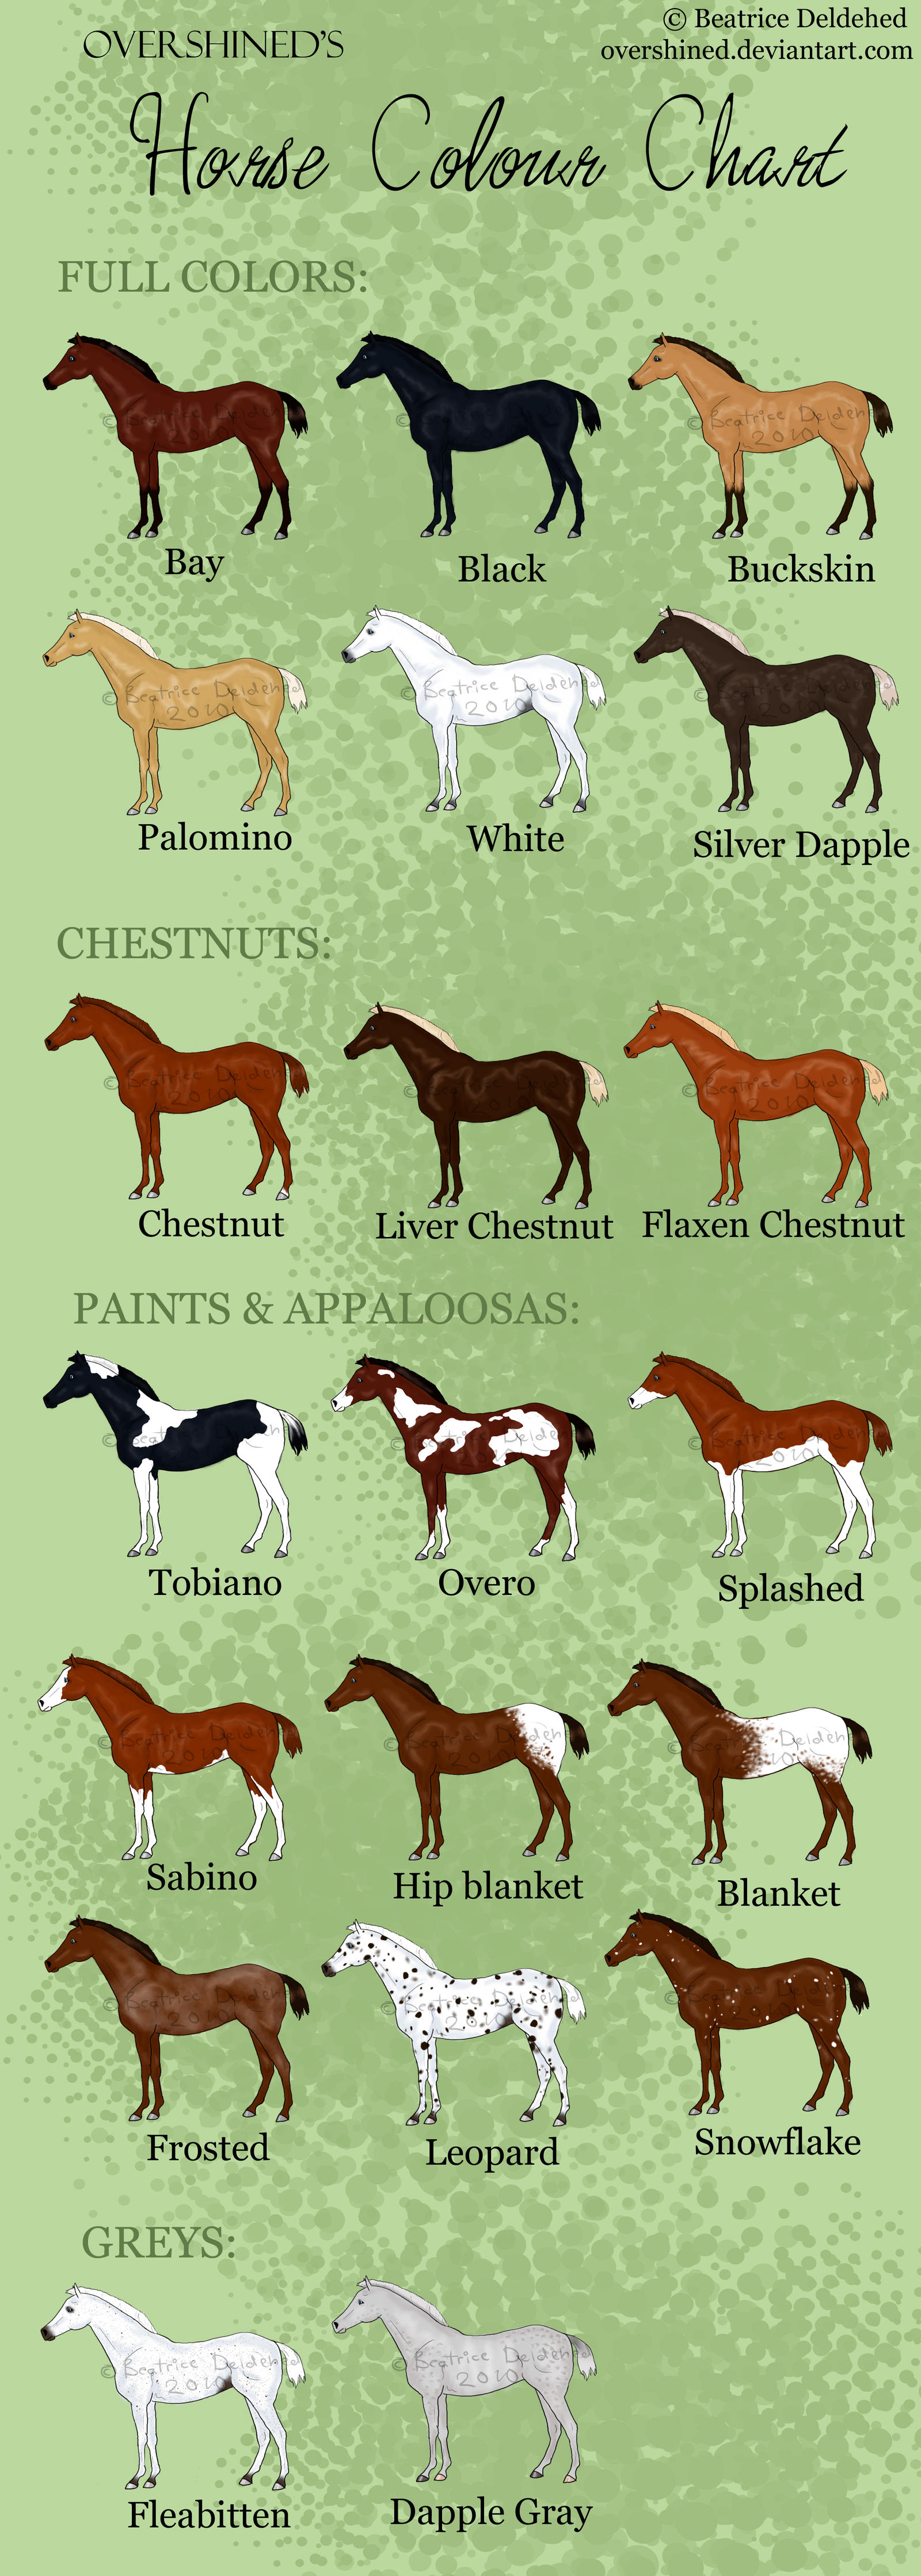 Horse Colour Chart by overshined on DeviantArt